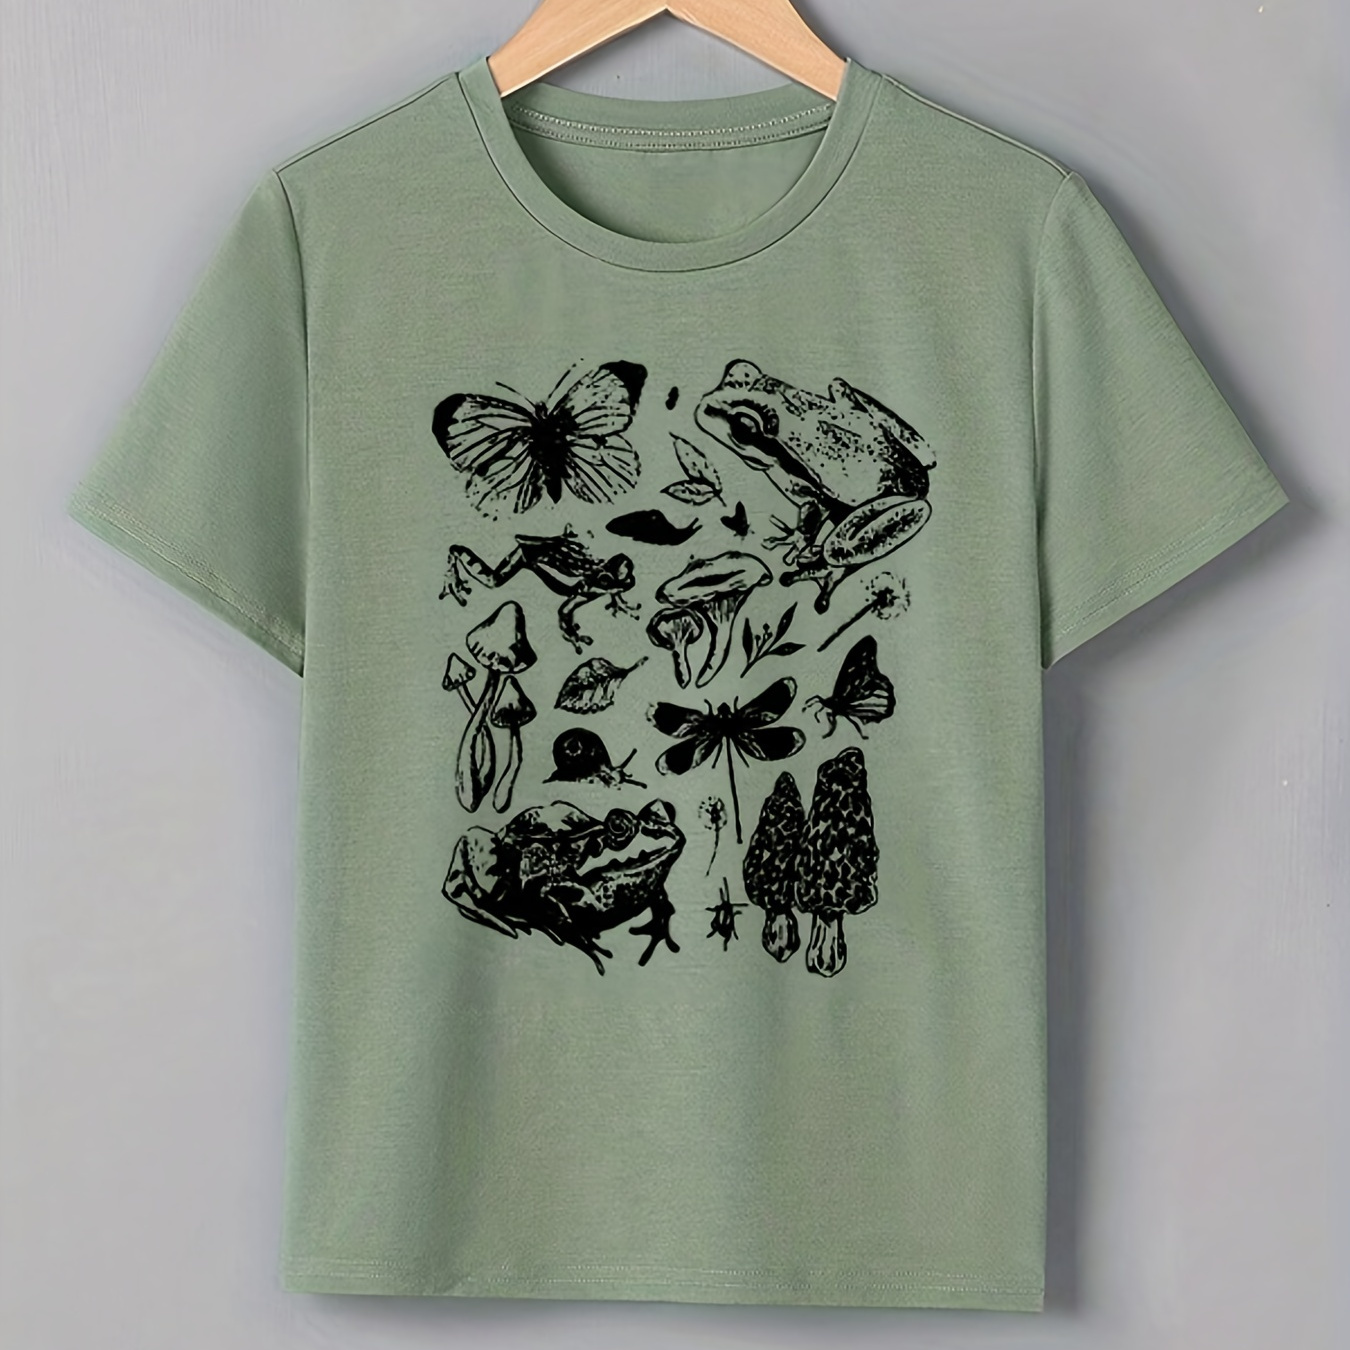 

Boys Casual T-shirt, Lightweight Comfy Short Sleeve Tops, Butterfly And Frog Graphic Tees For Unisex Toddlers Summer, Kids Clothings